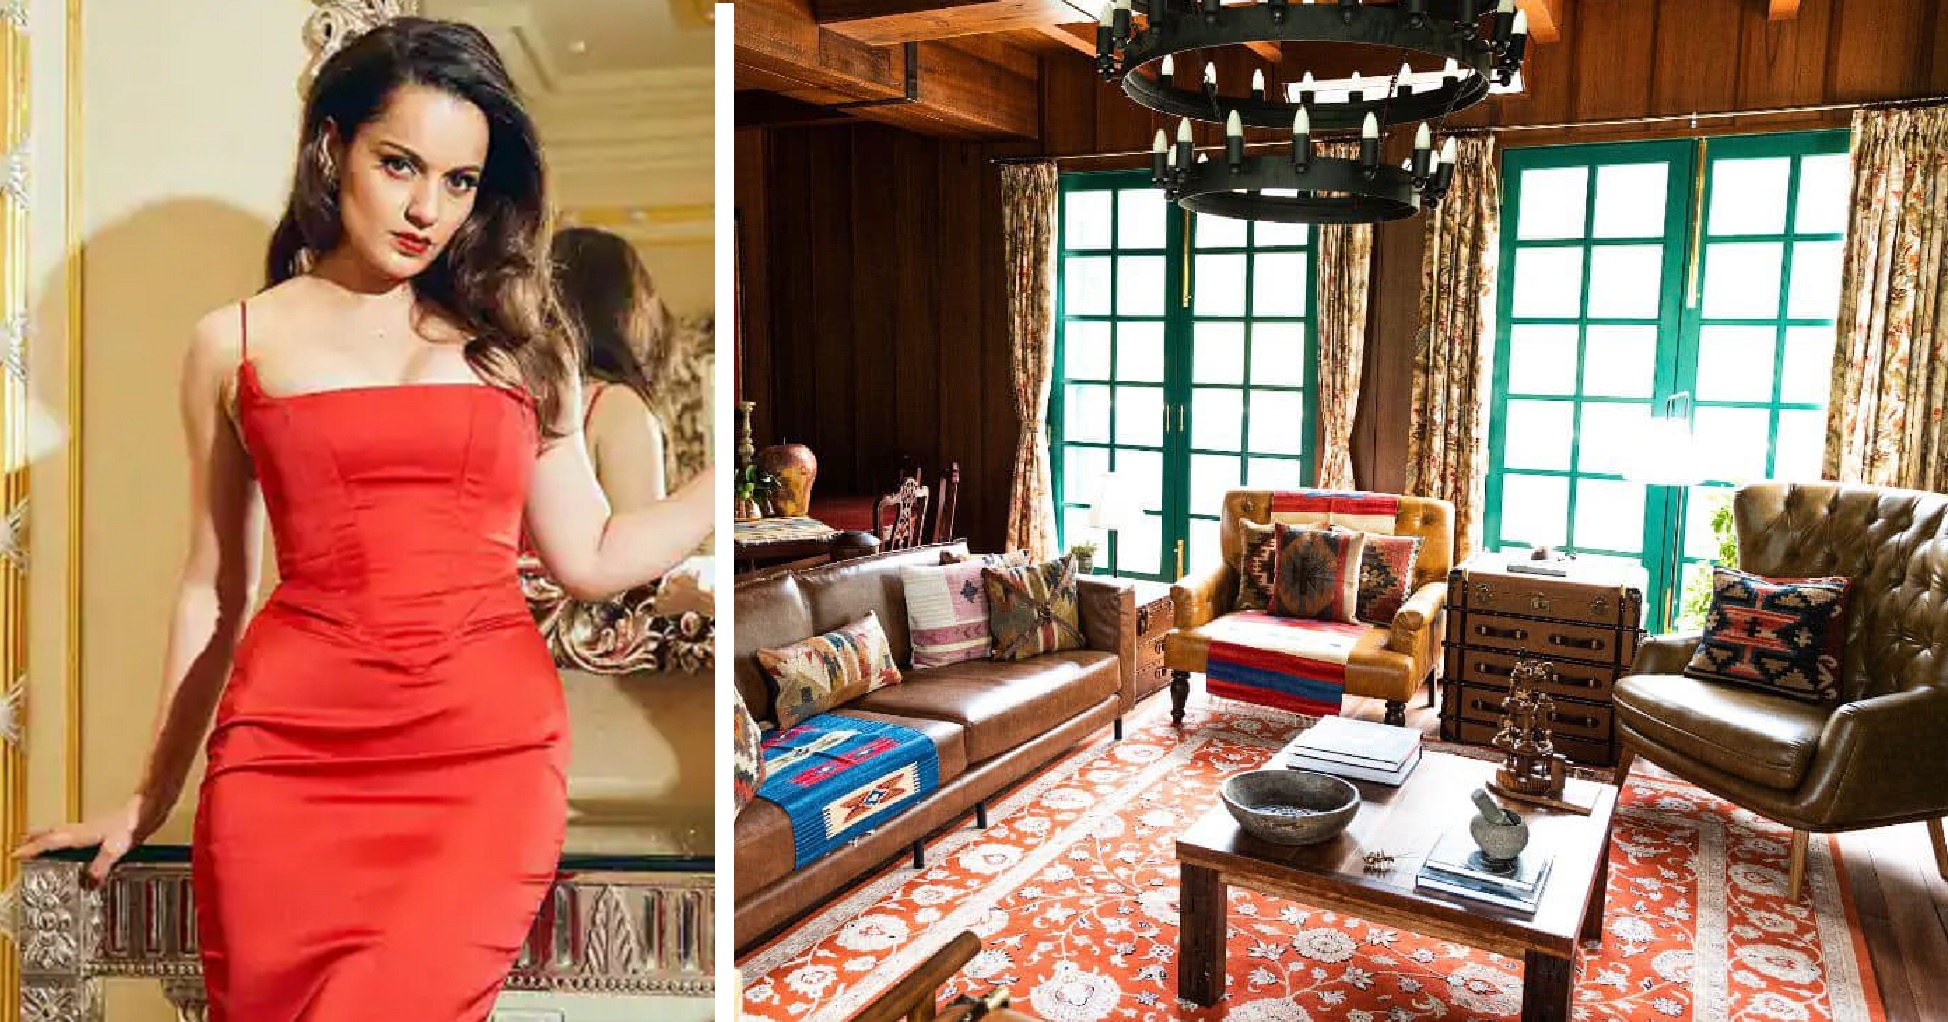 Kangana Ranaut Buys Stunning New House In Himachal, Promotes Local Culture & Indian Art Through It’s Design